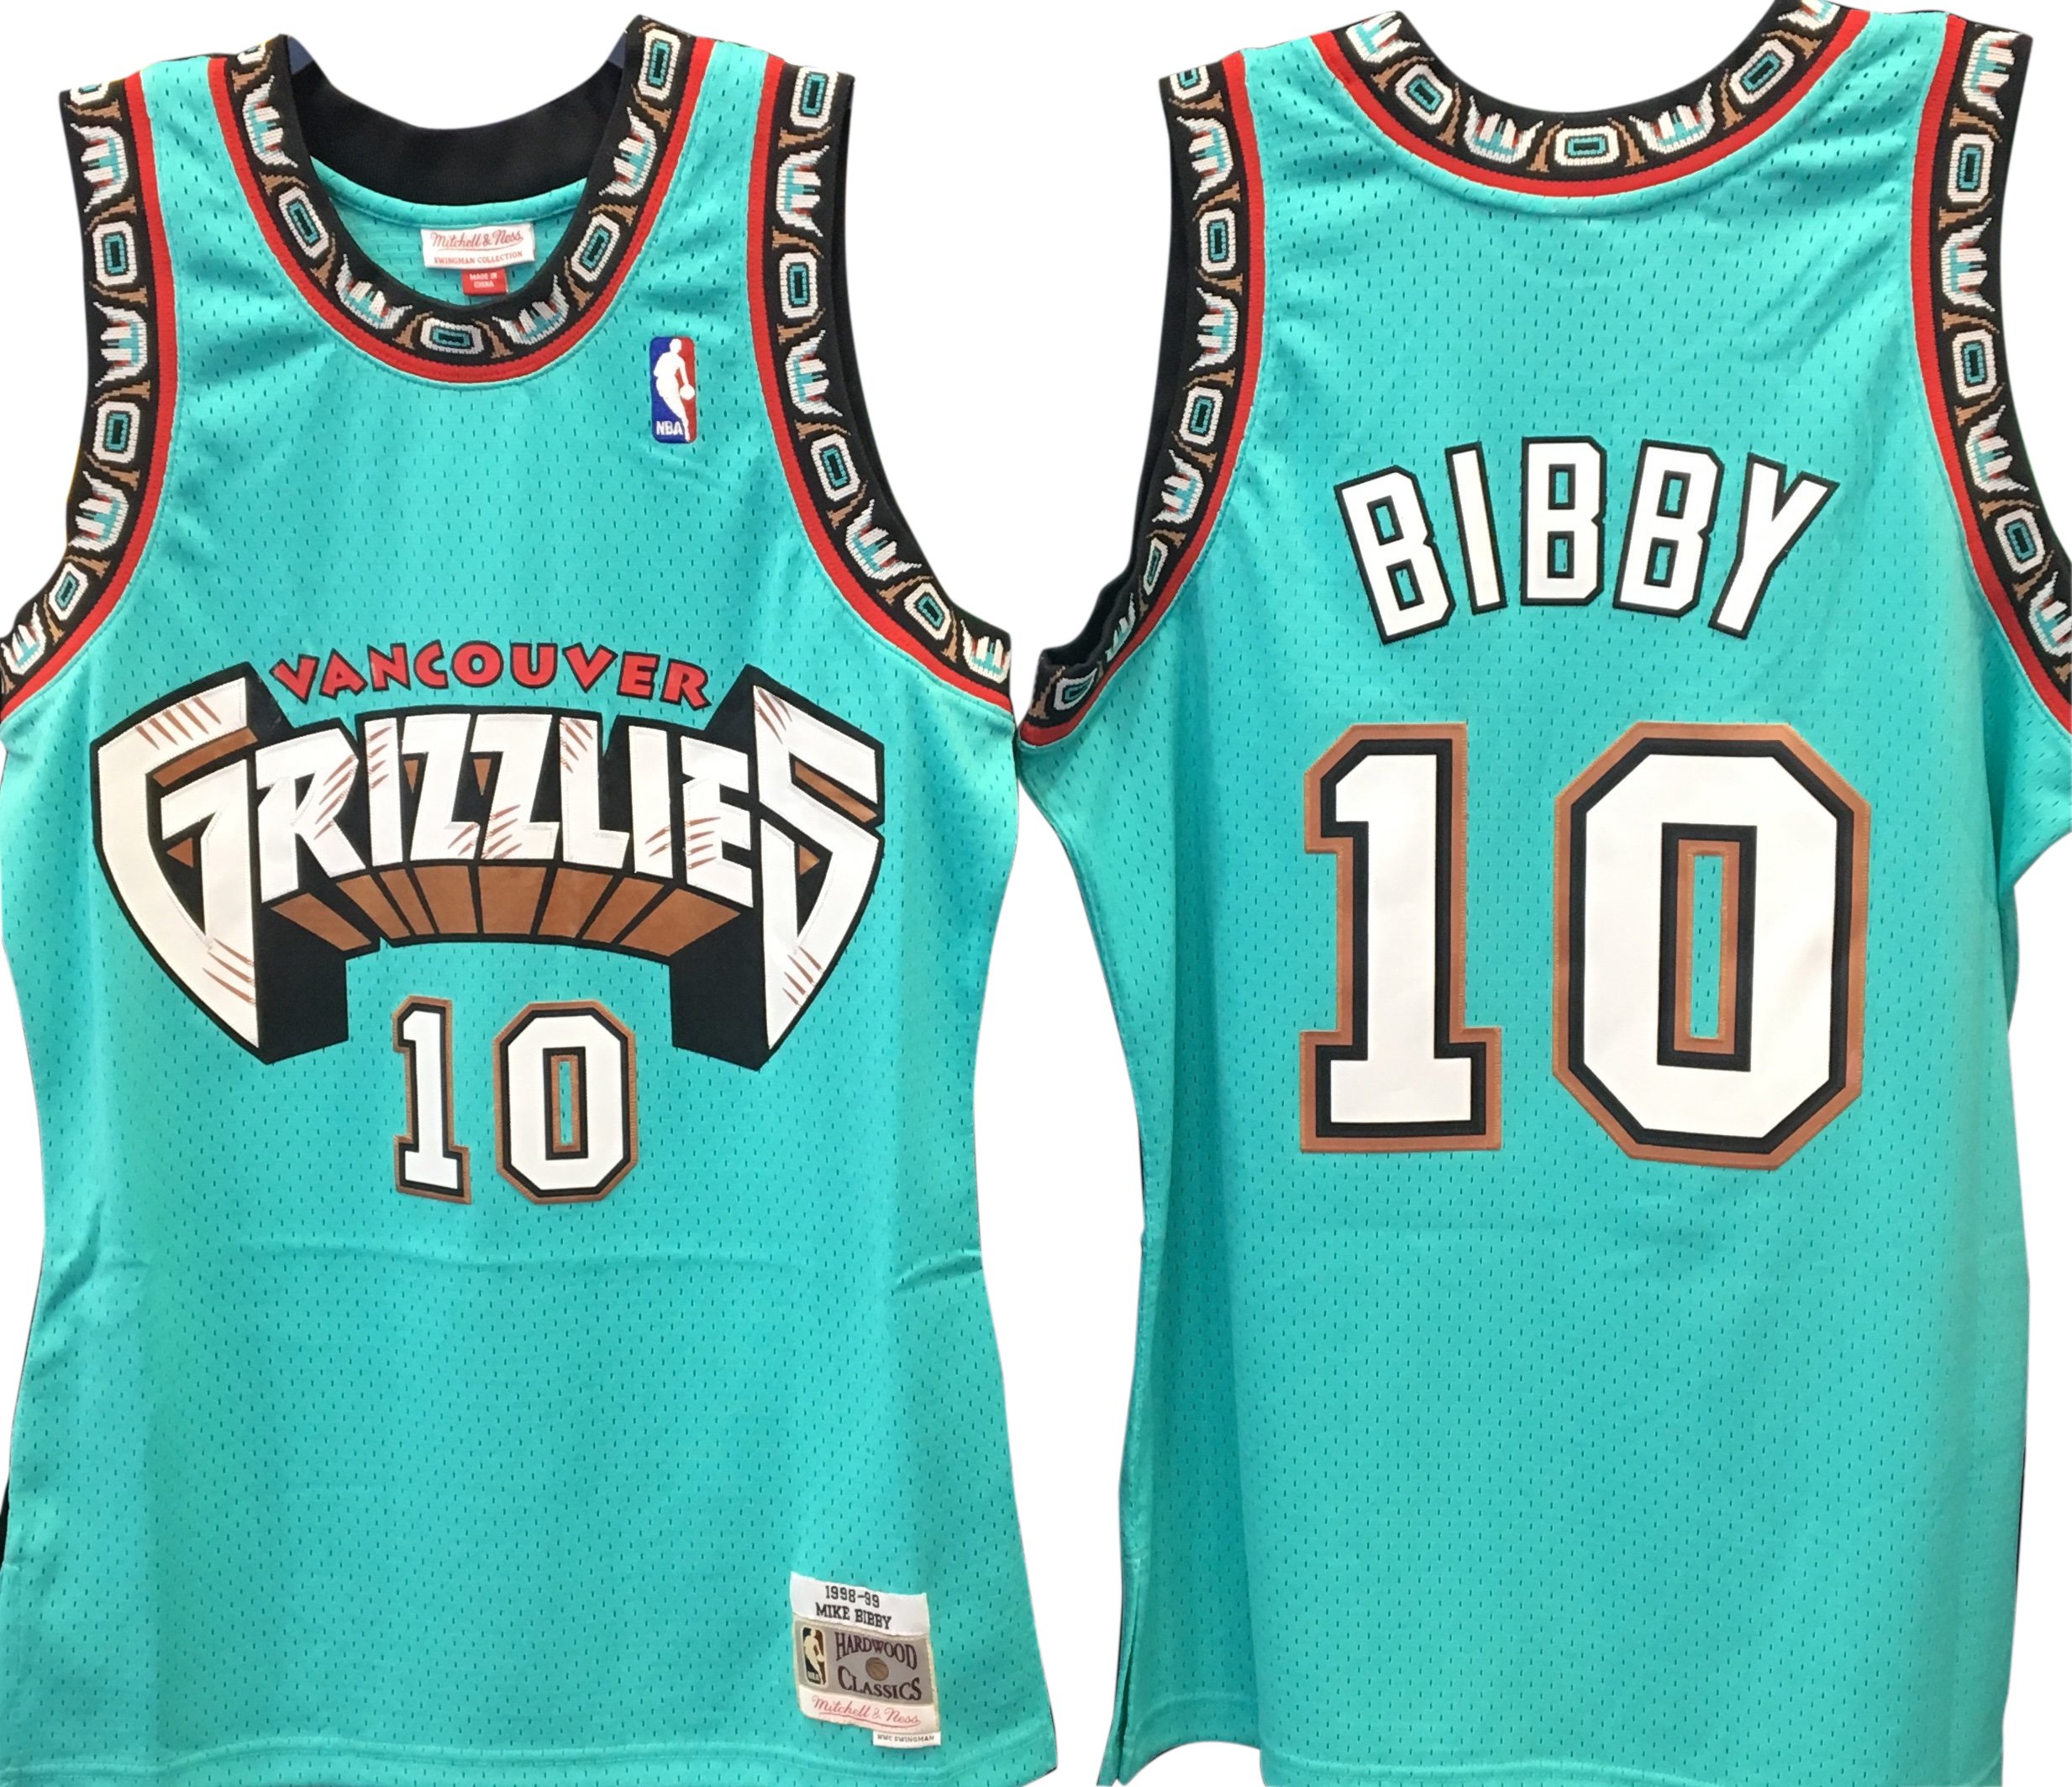 vancouver grizzlies basketball jersey